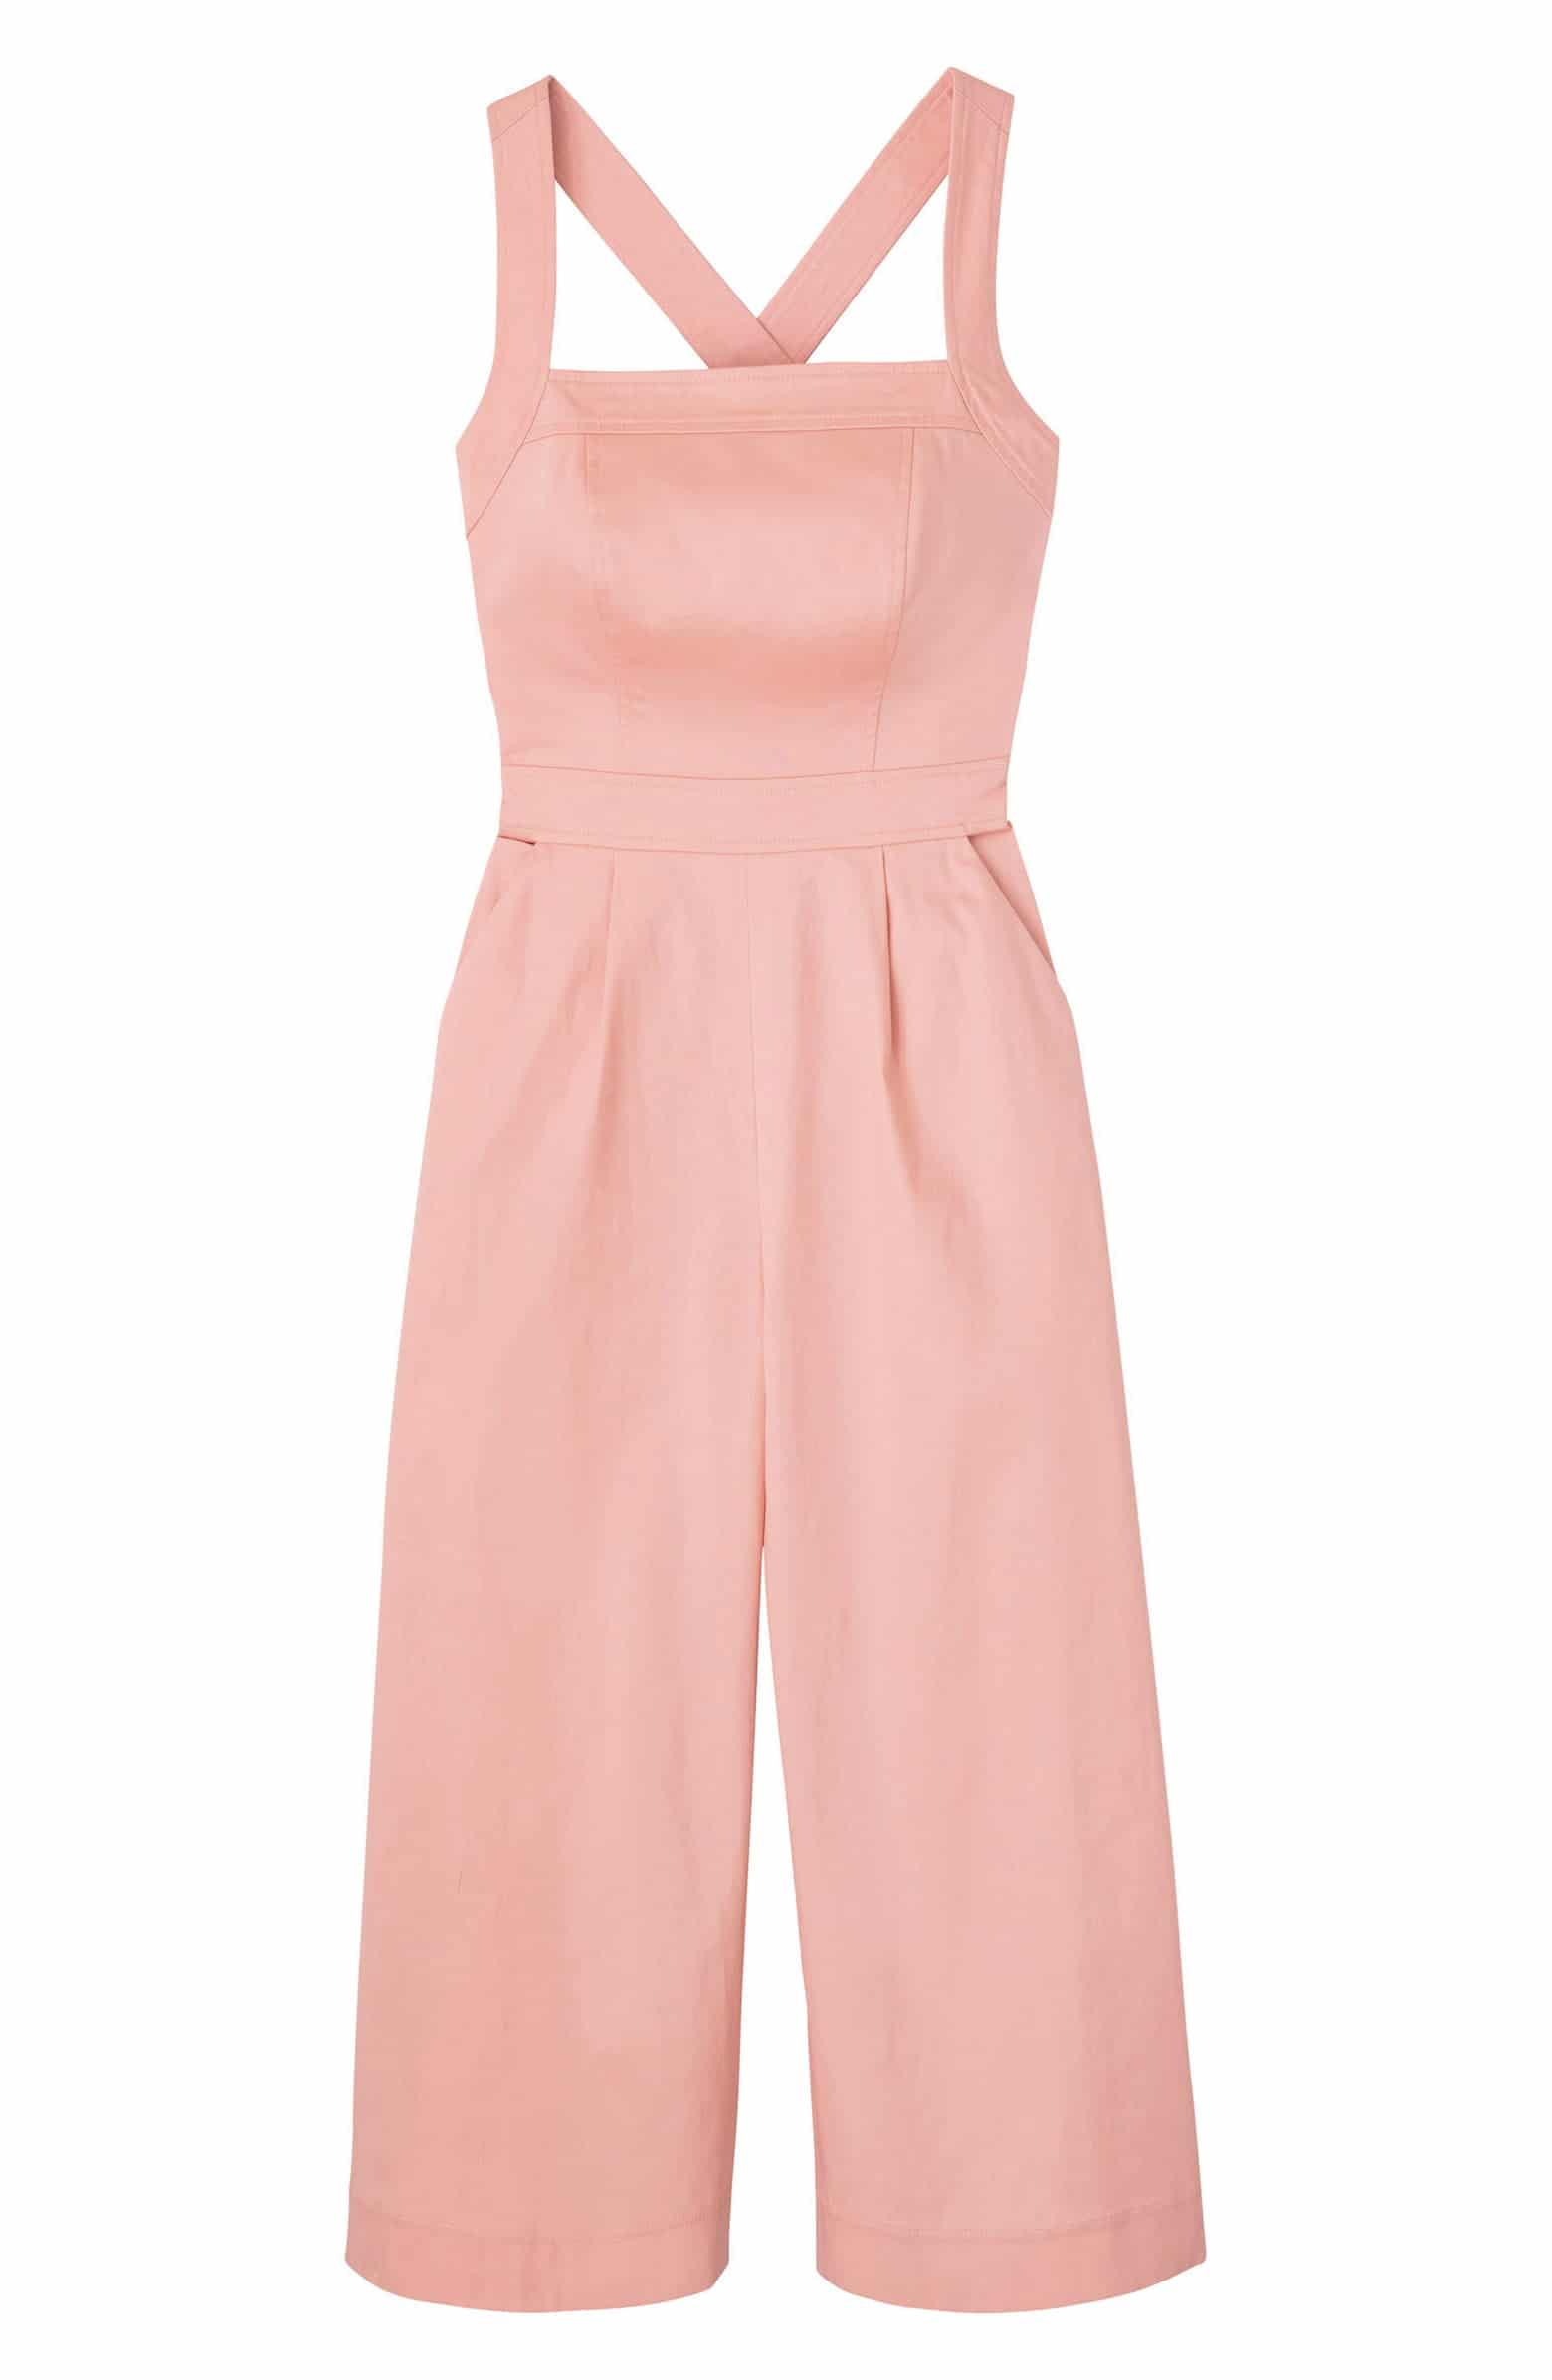 These 10 Rompers Are So Cute You'll Forget They're Super Inconvenient In the Bathroom